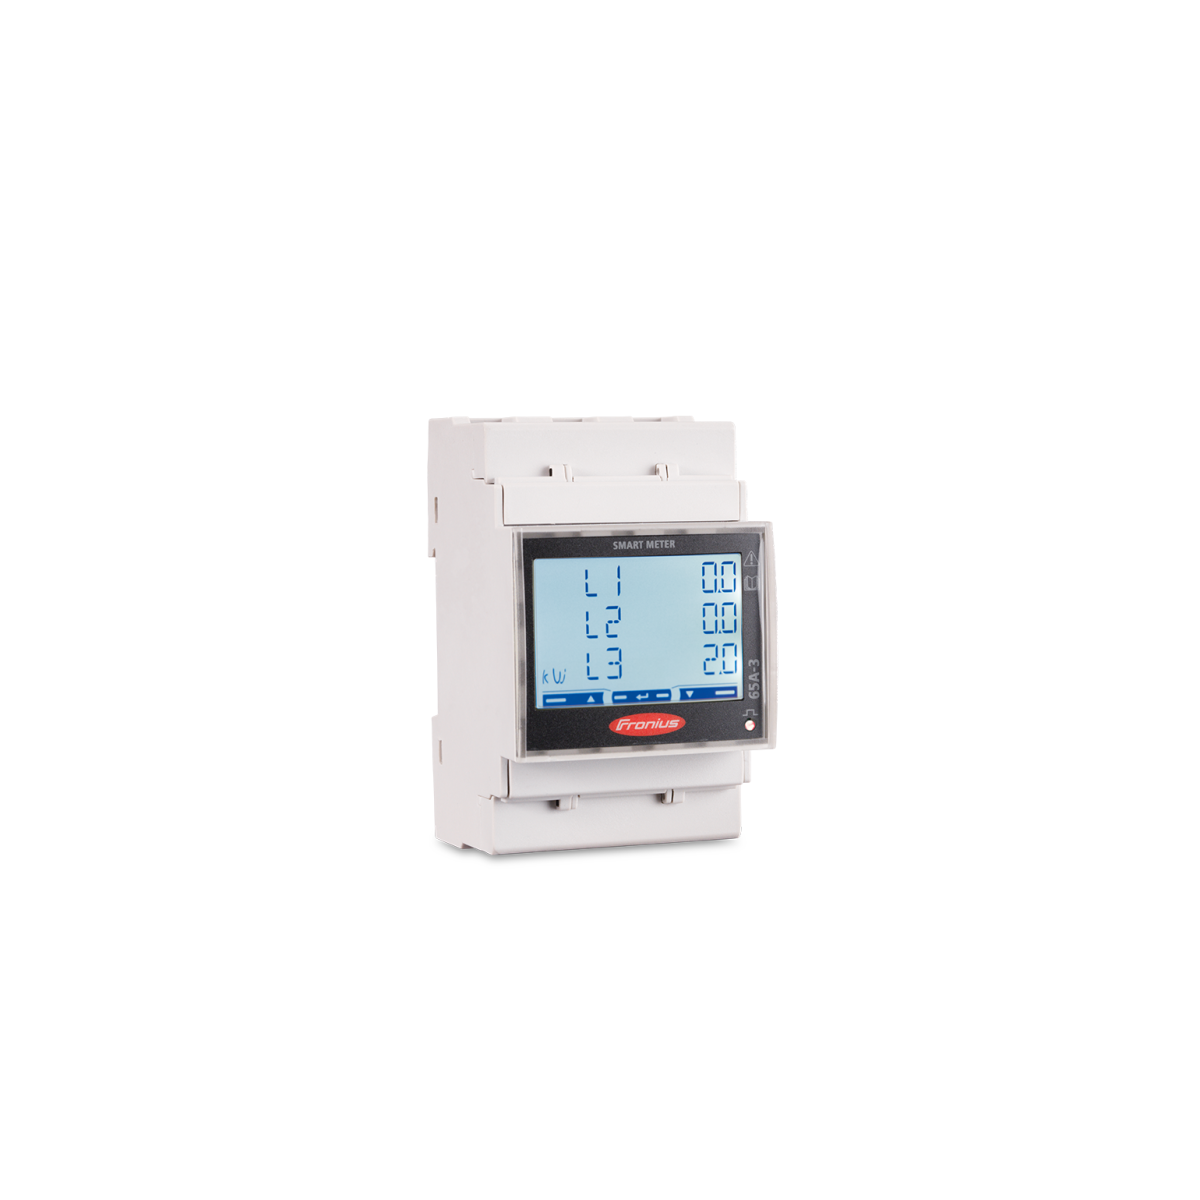 https://shop.ssp-products.at/media/image/product/8814/lg/fronius-smart-meter-ts-65a-3-smart-meter-mit-touch-display.png